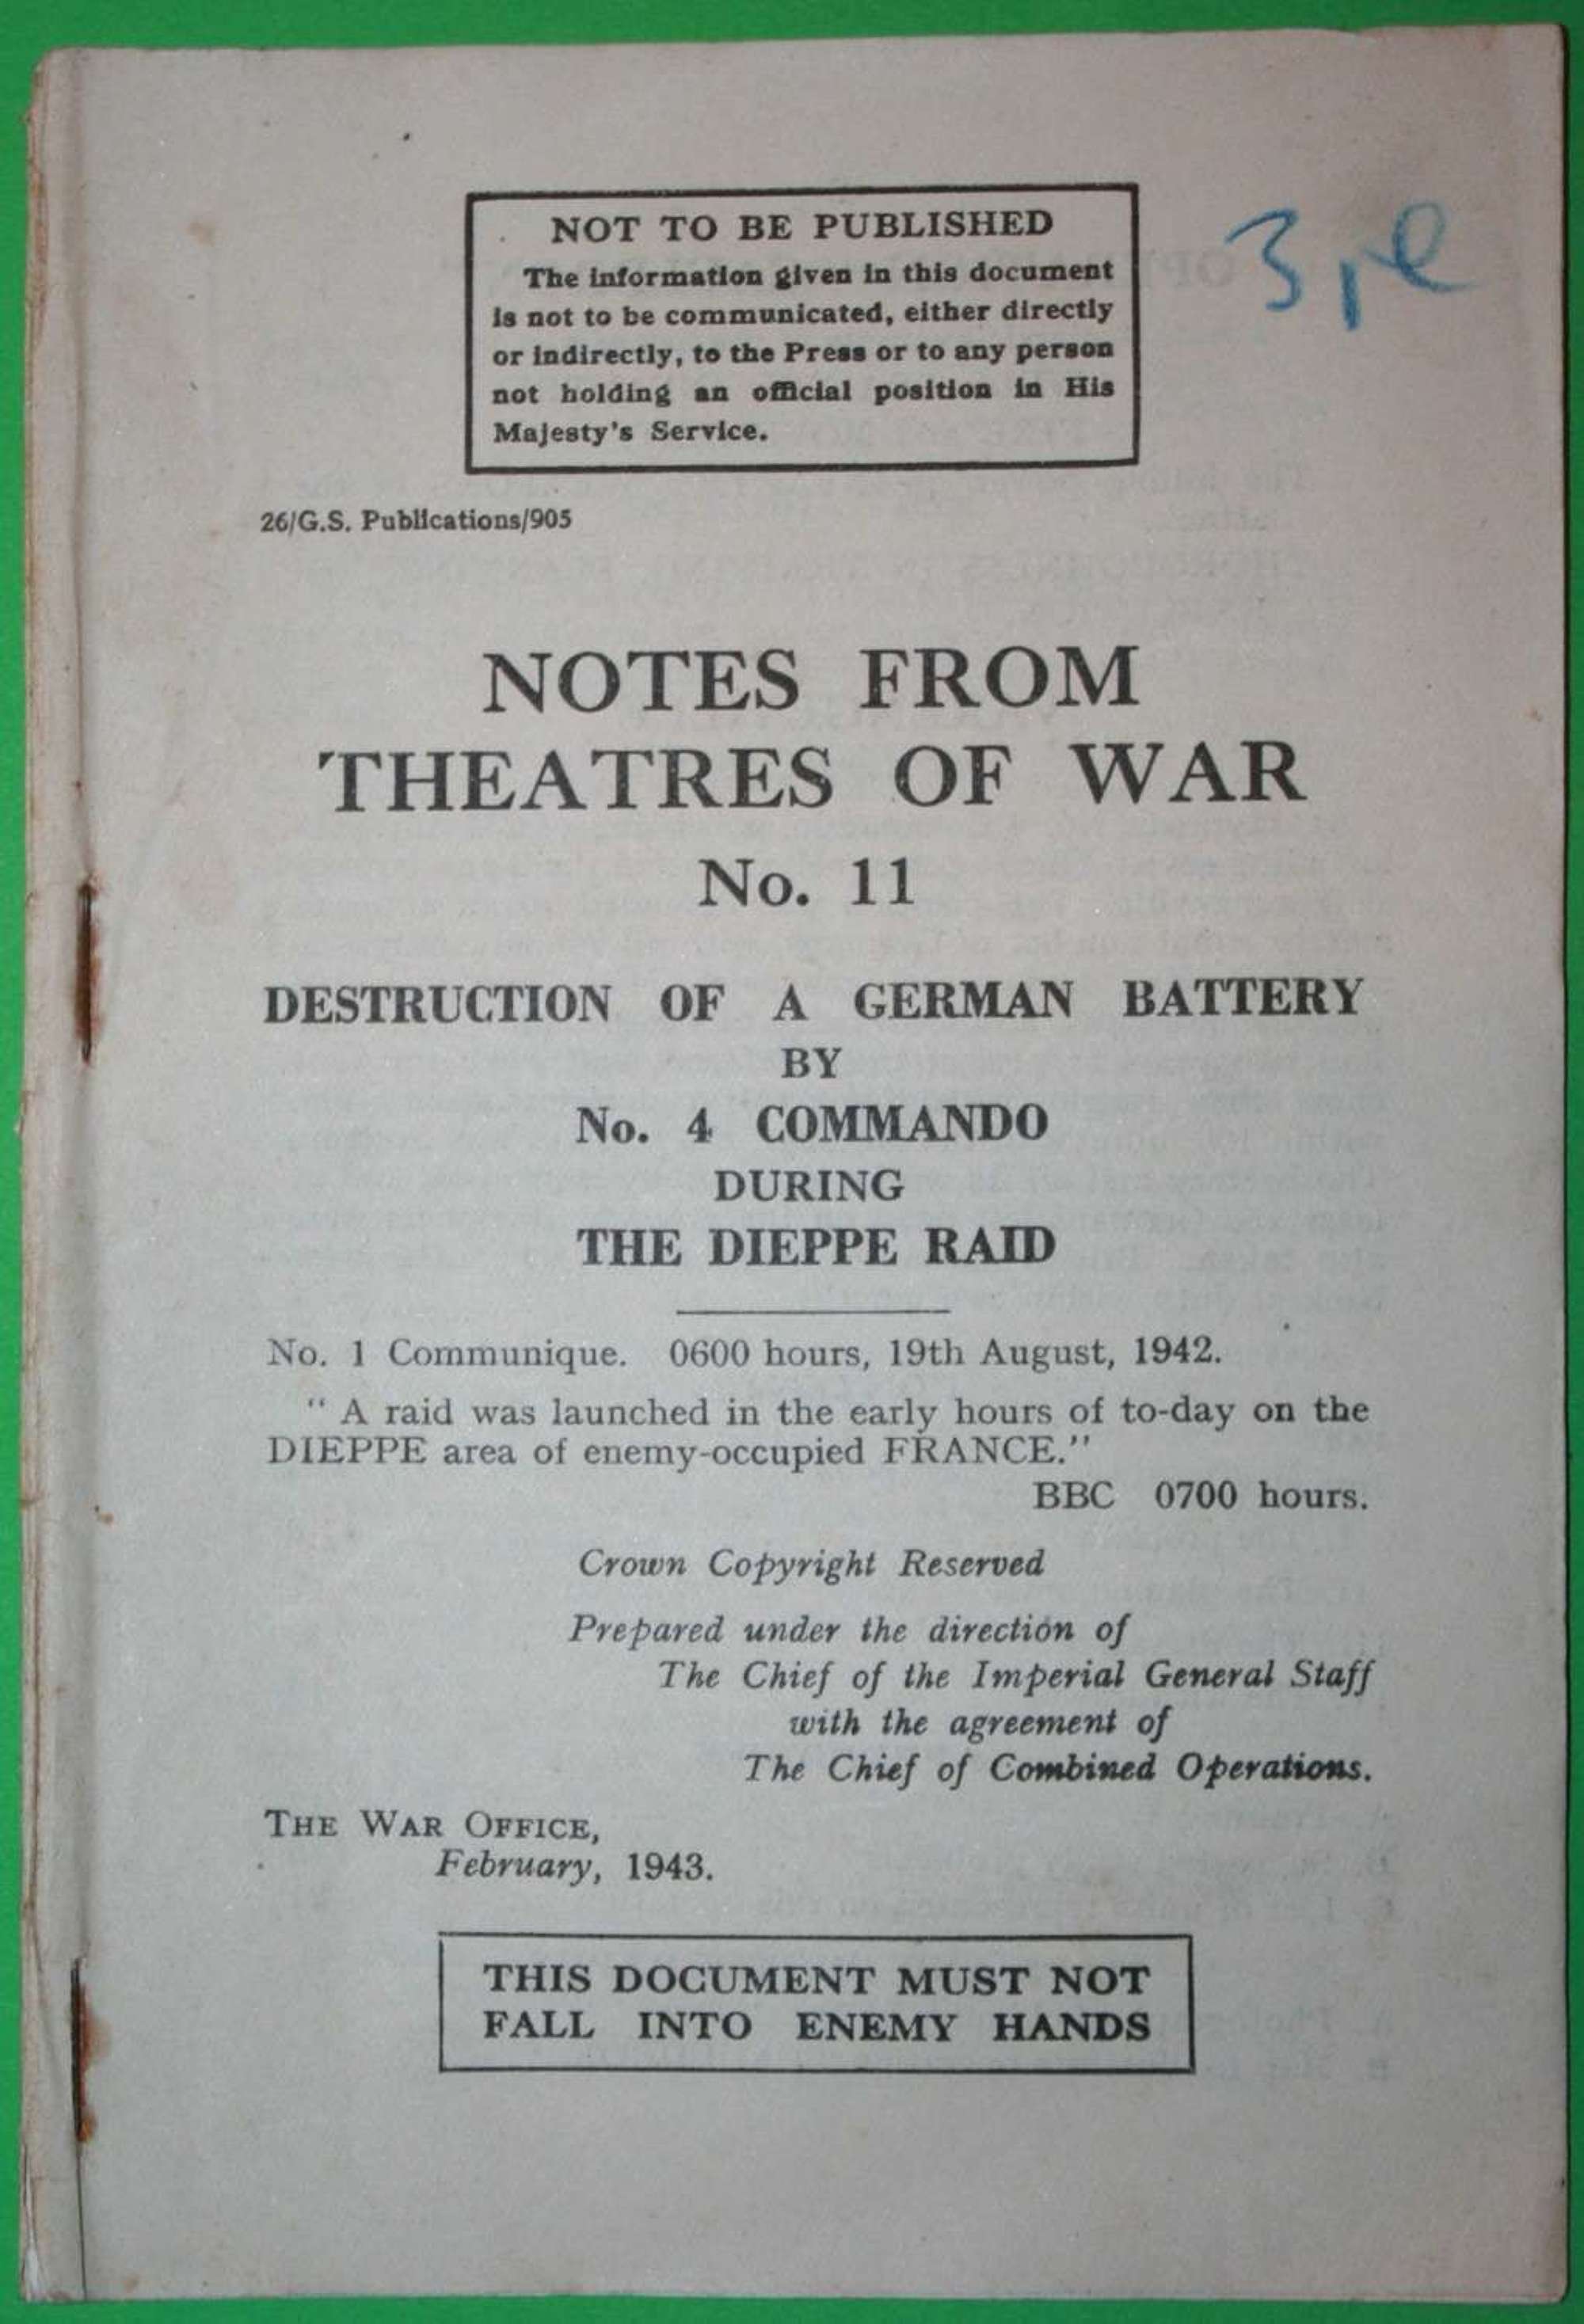 NOTES FROM THE THEATERS OF WAR NO11 DESTRUCTION OF A GERMAN BATTERERY